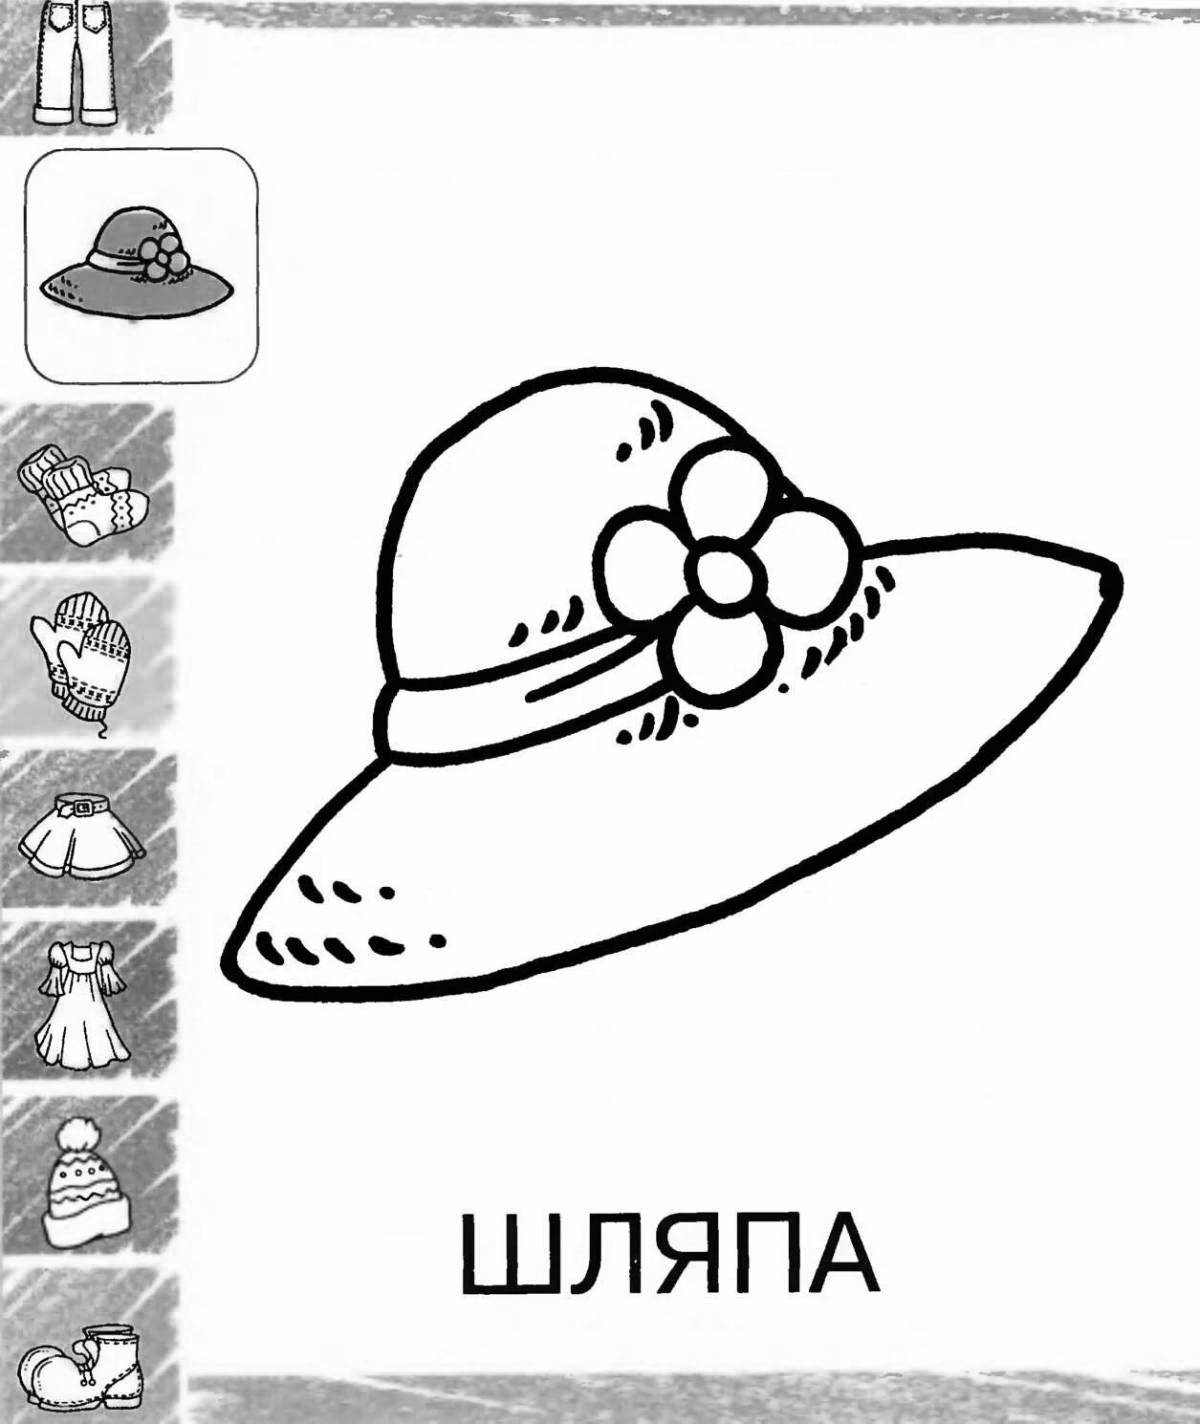 Fantastic hat coloring book for children 4-5 years old